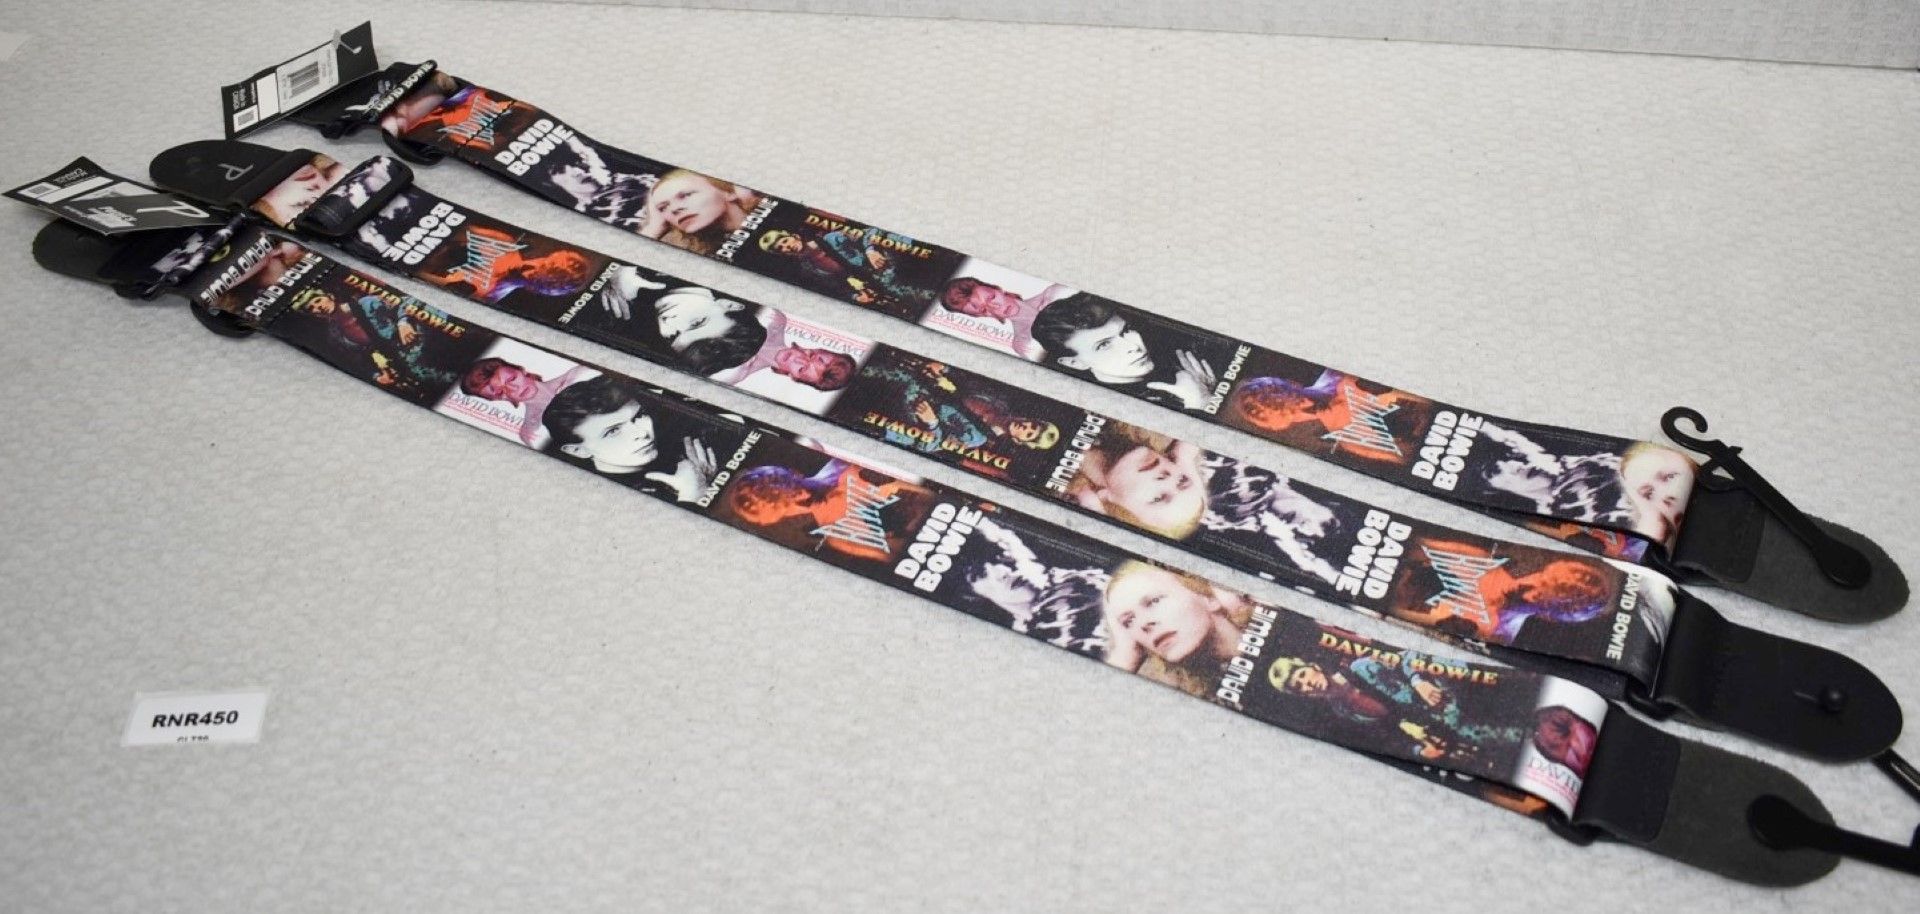 3 x David Bowie Guitar Straps by Perri's - Officially Licensed Merchandise - RRP £90 - New & Unused - Image 2 of 8